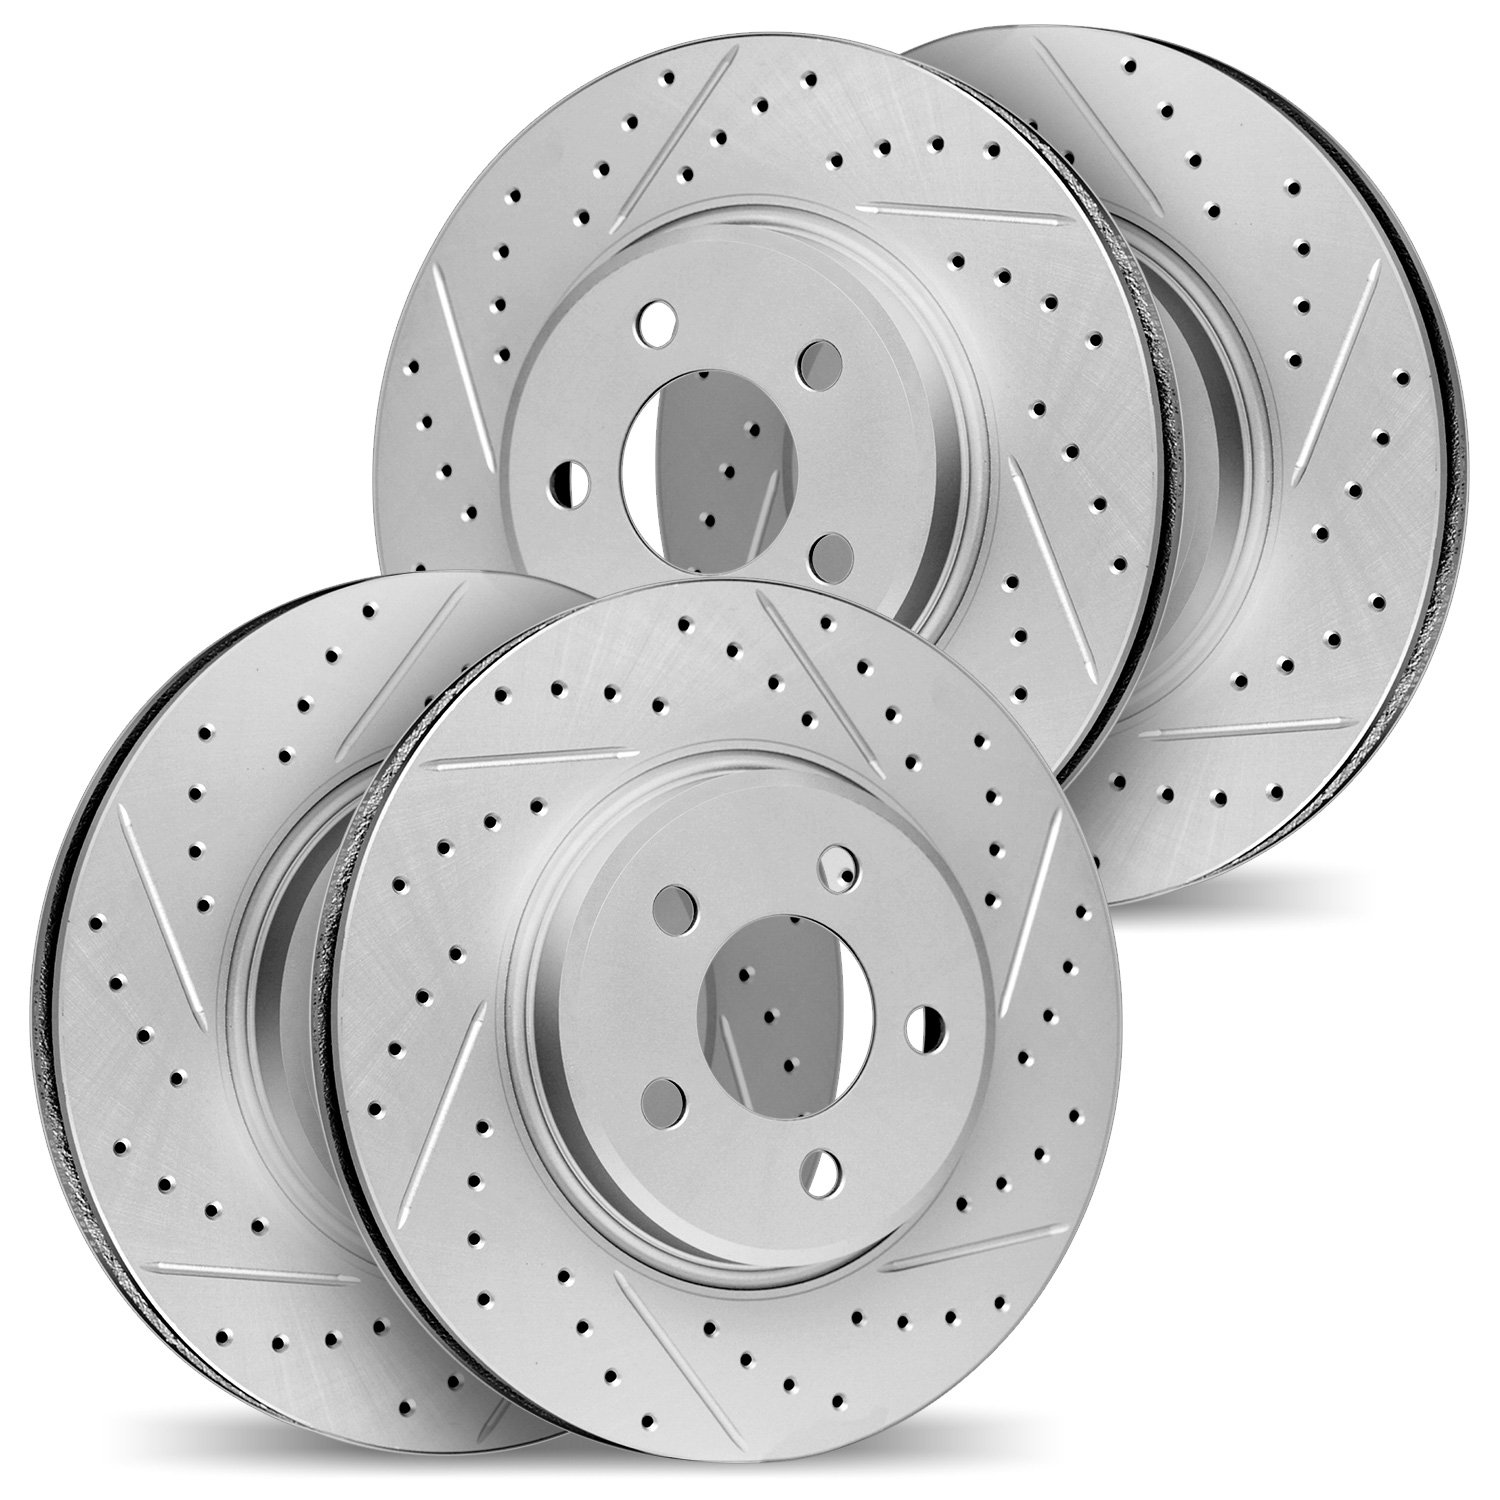 2004-31043 Geoperformance Drilled/Slotted Brake Rotors, 2012-2019 BMW, Position: Front and Rear